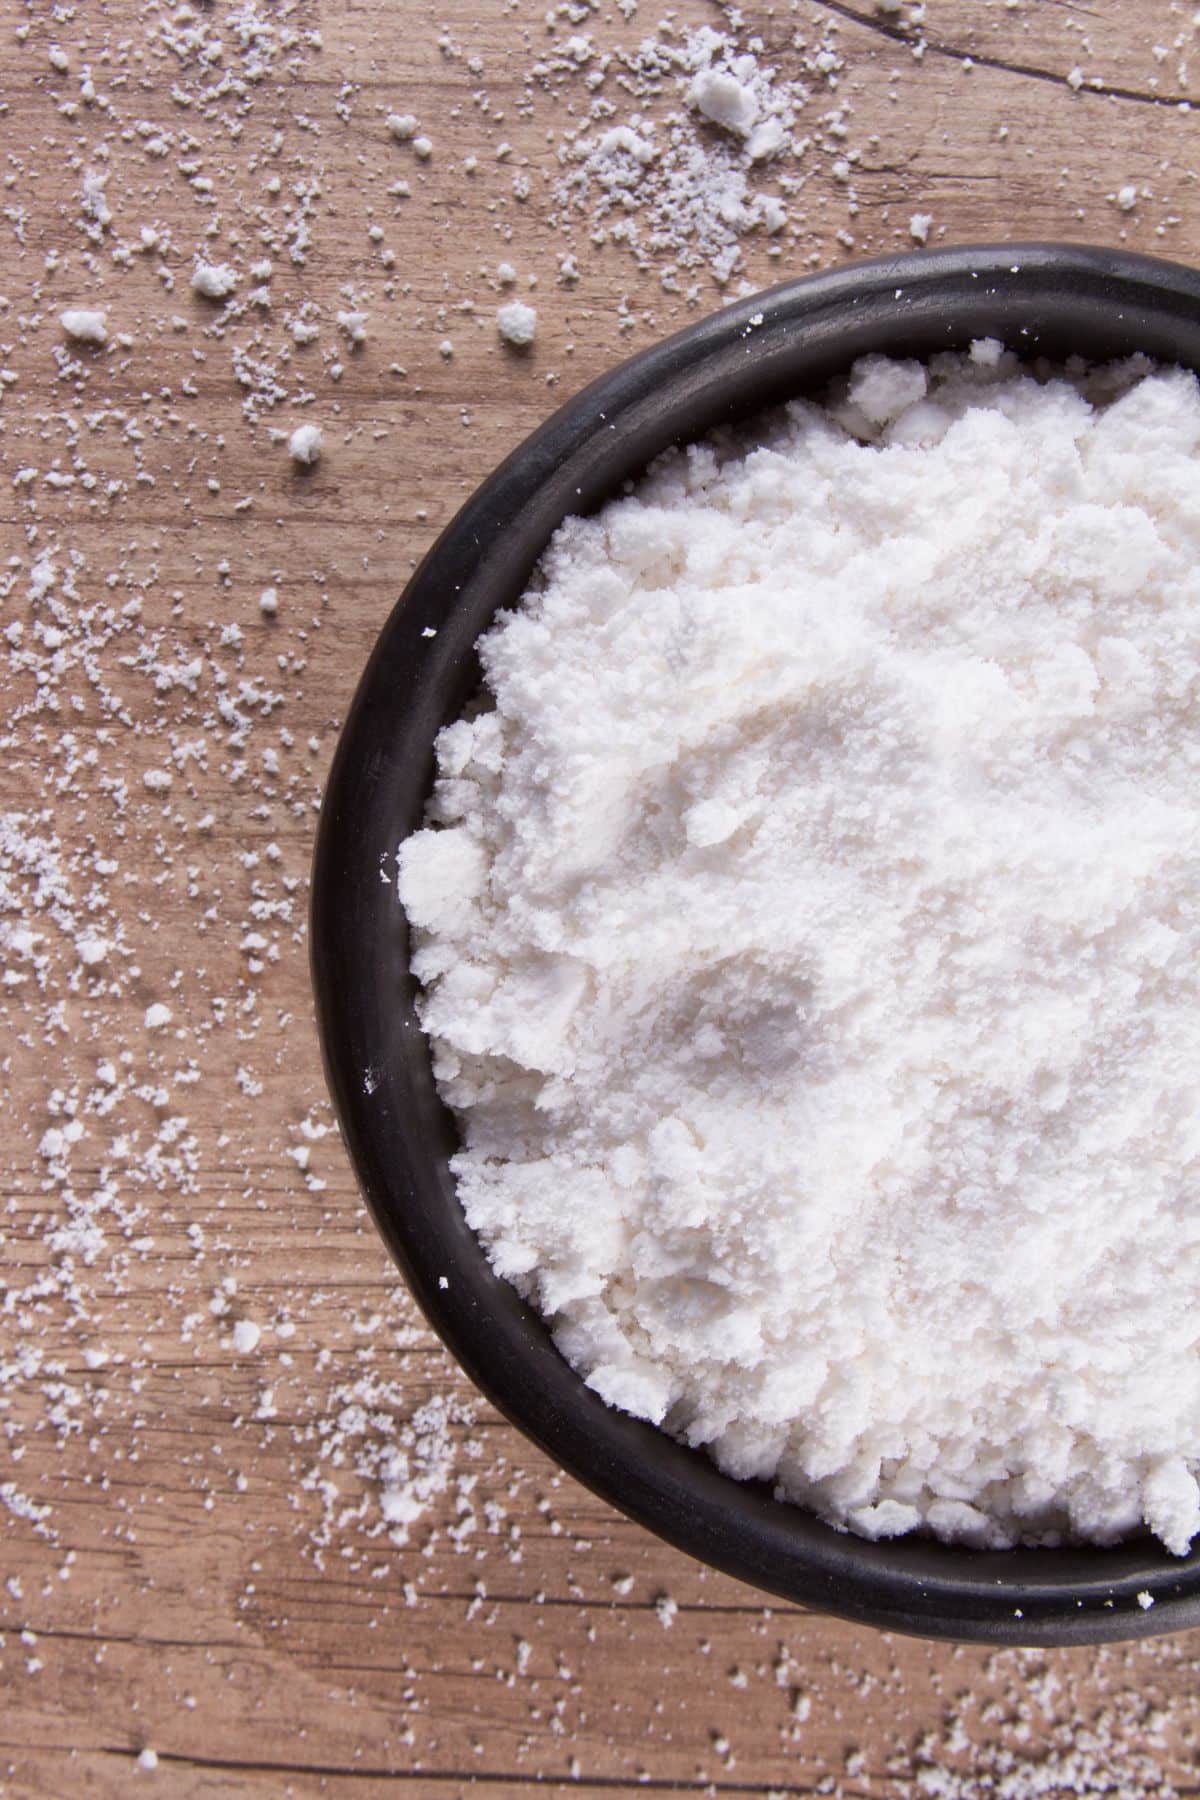 Bowl of tapioca flour on wooden surface.